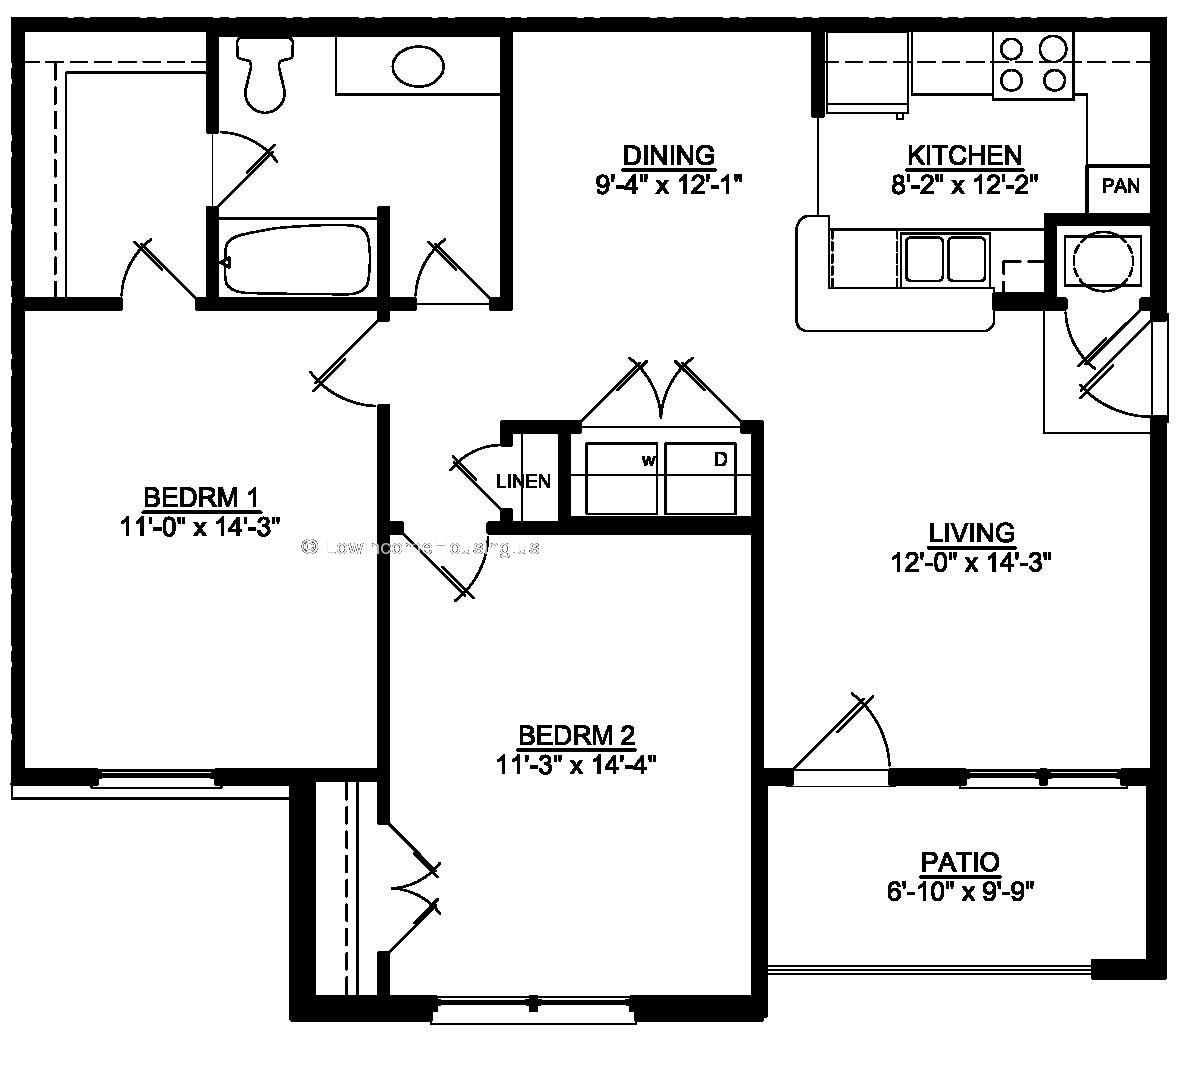 Two large bedrooms (14' x 14'); living area (12' x 14'); exterior Patio (9; x 6') 